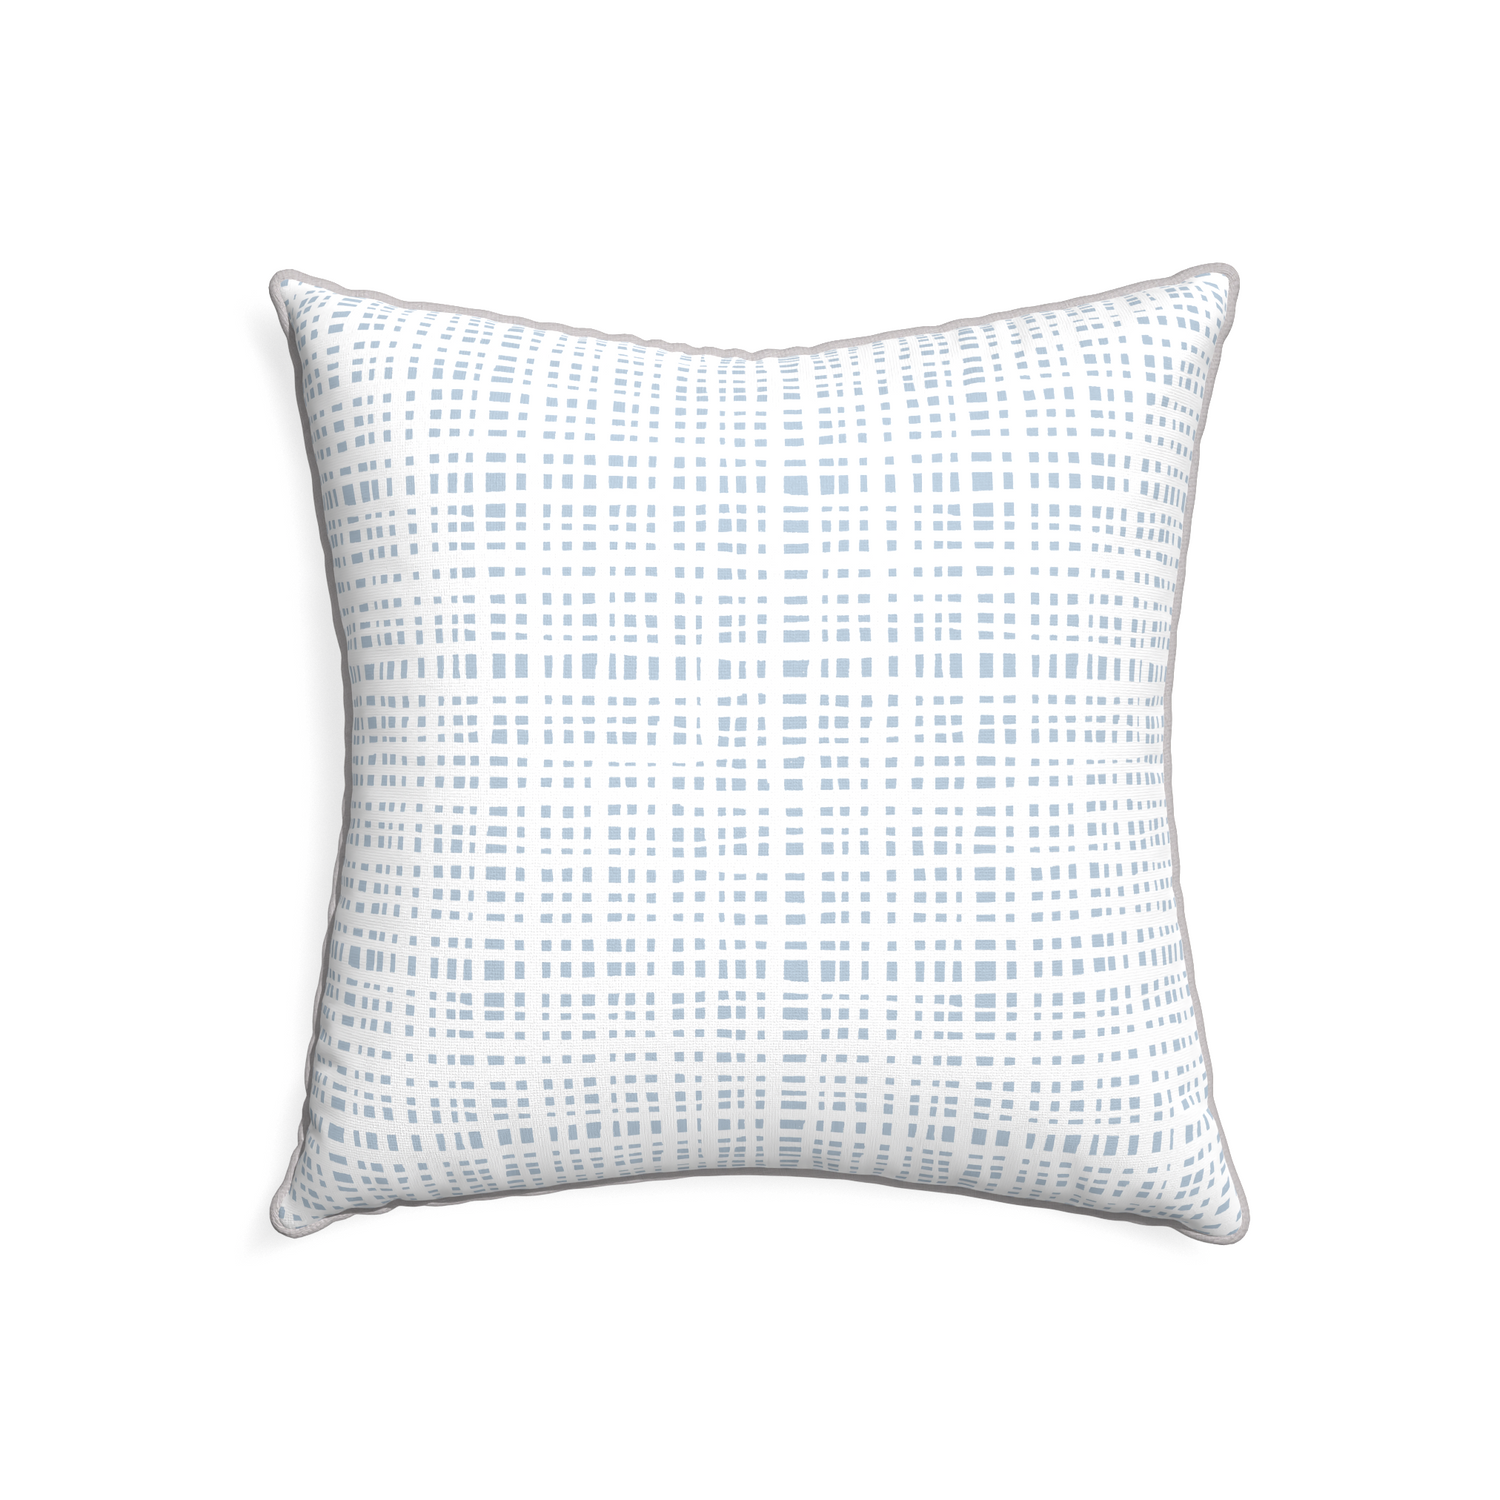 22-square ginger sky custom pillow with pebble piping on white background